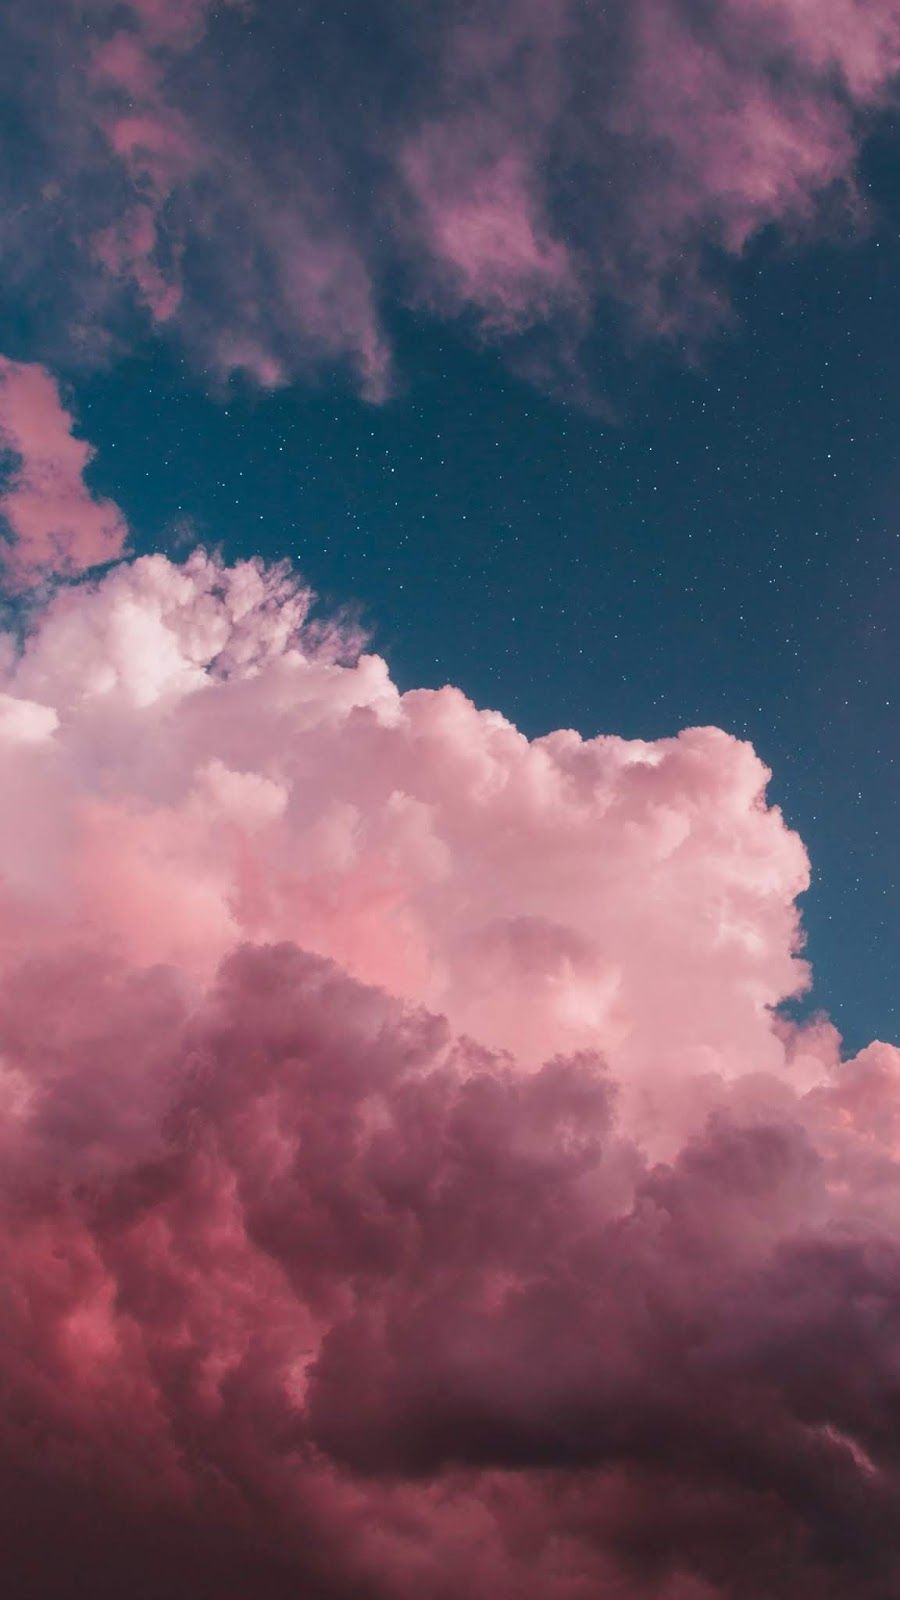 Pink clouds in the night sky